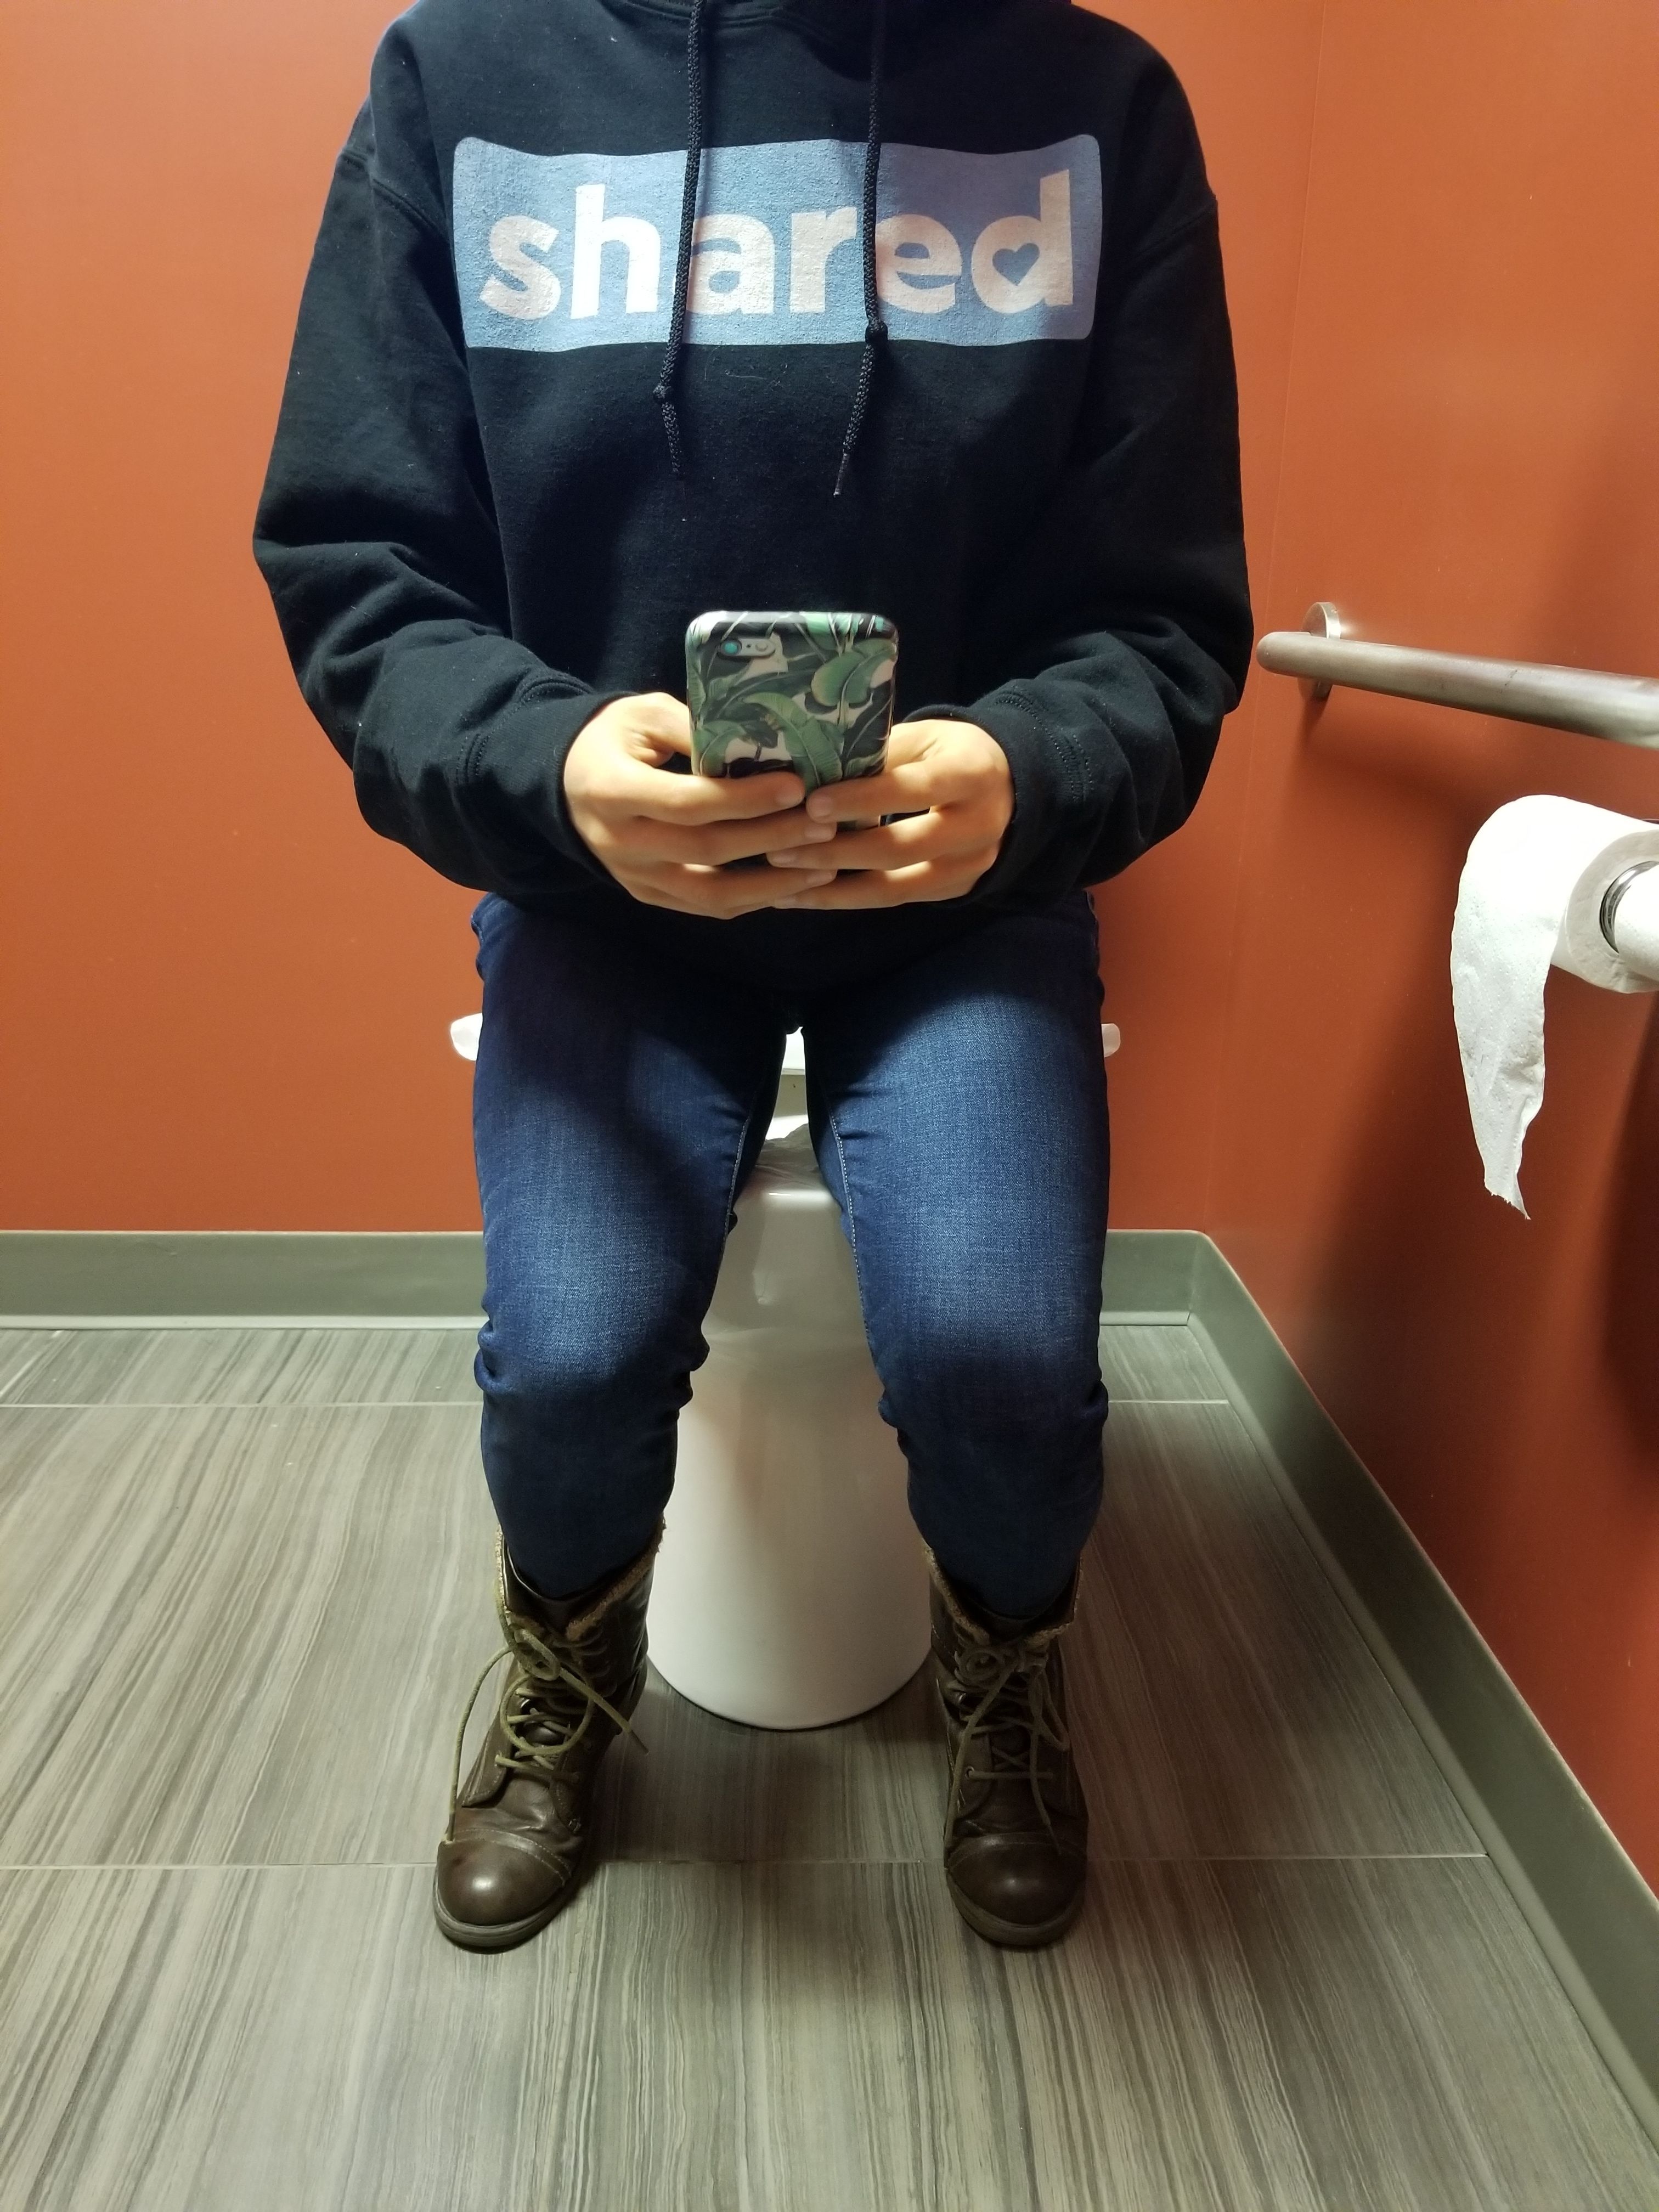 sitting on toilet seat with phone 